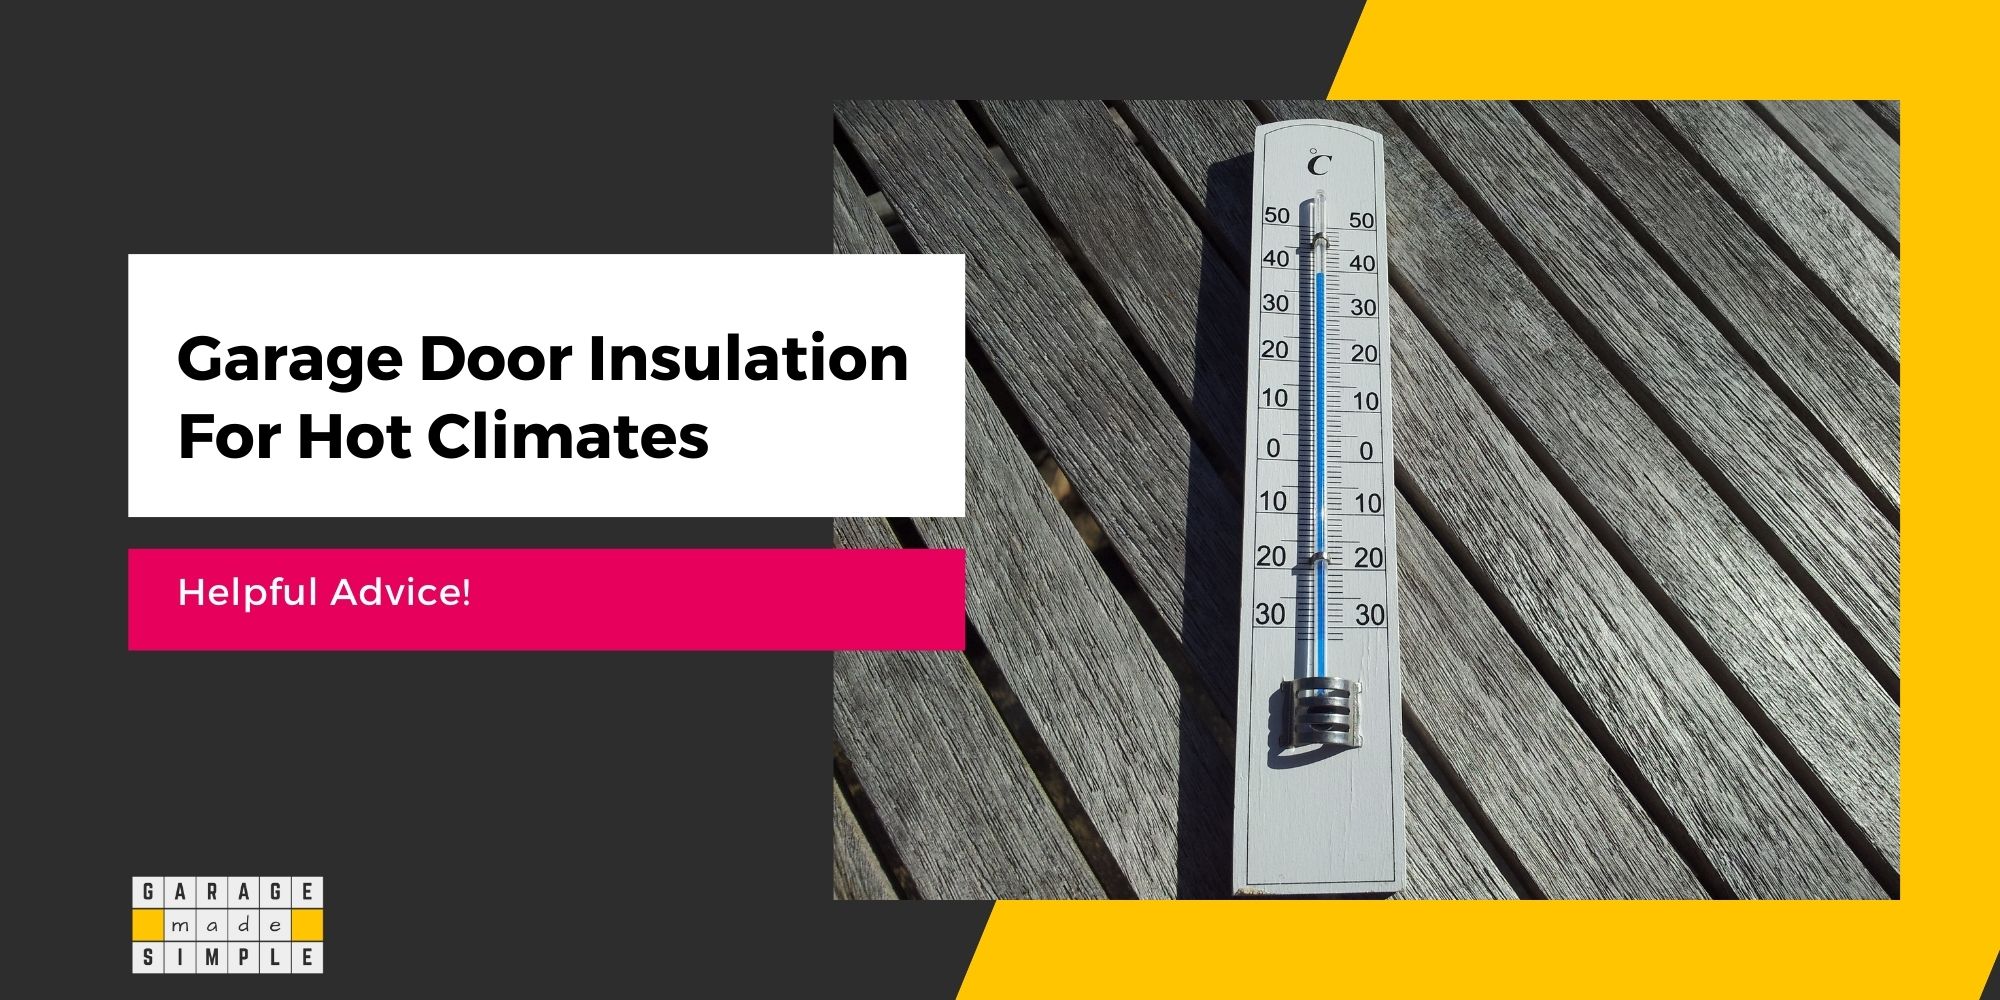 The Best Garage Door Insulation For Hot Climates (Helpful Advice!)